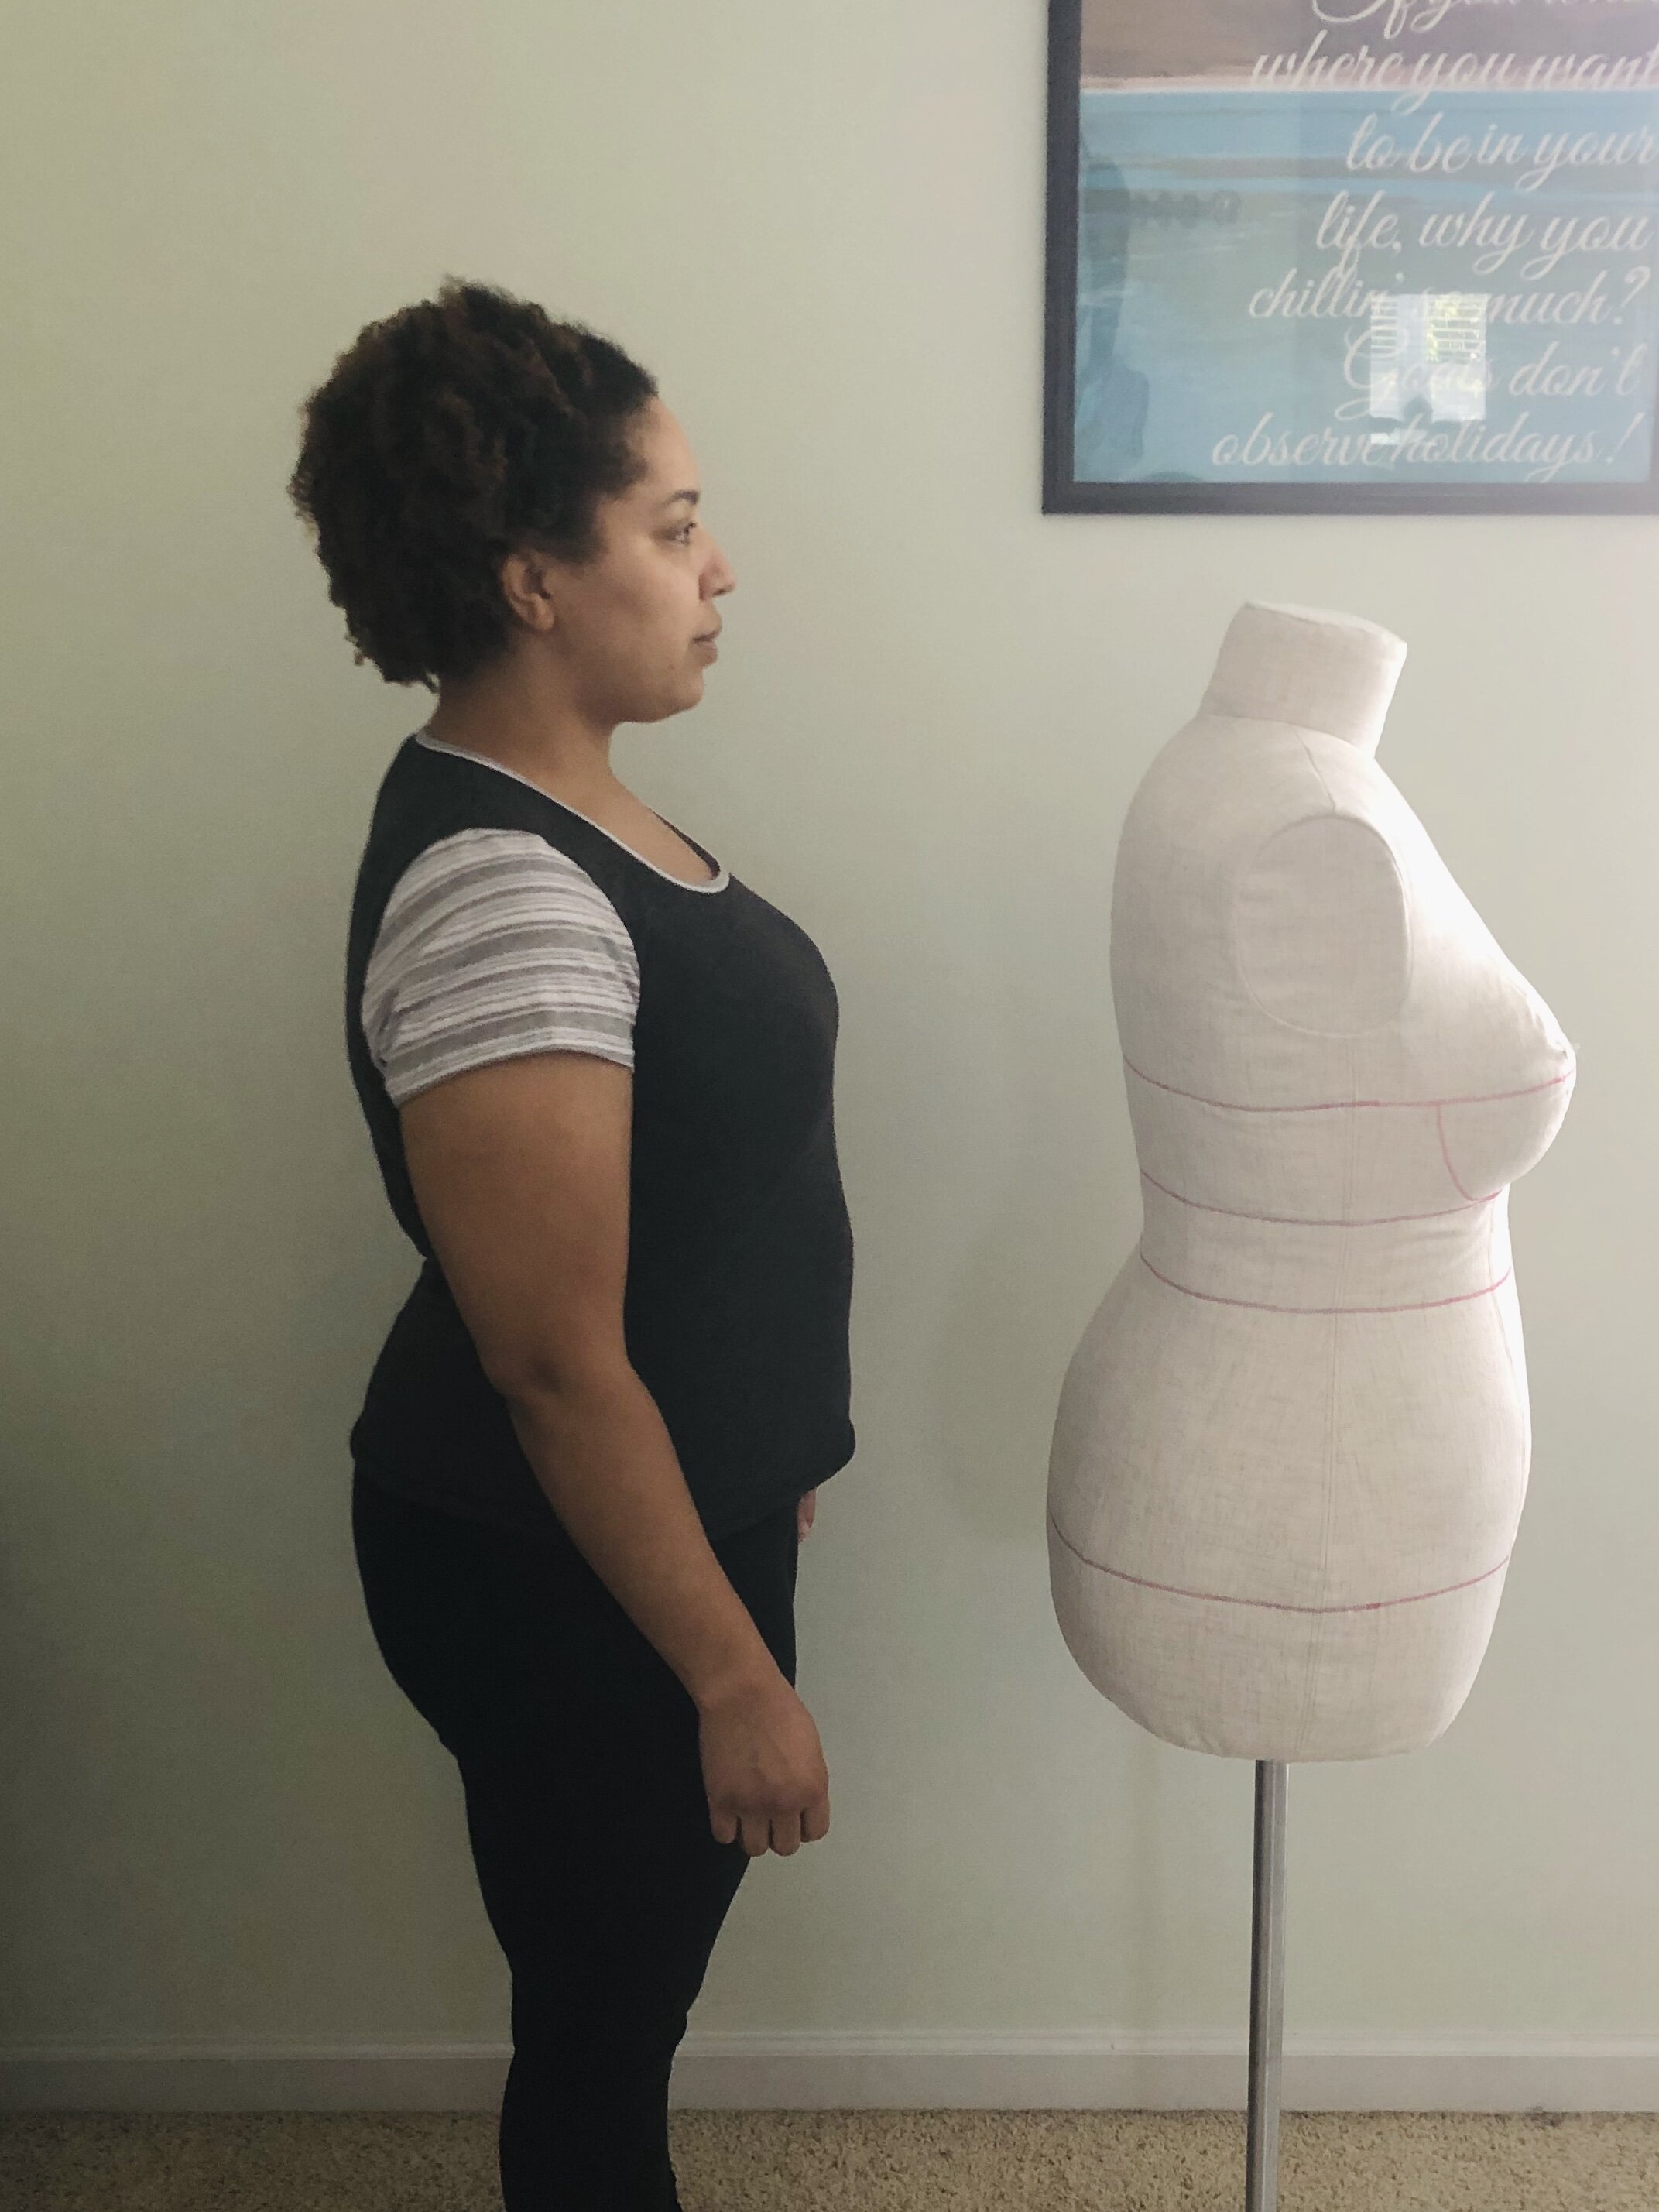 My DIY Dress Form! — LearningSewMuch